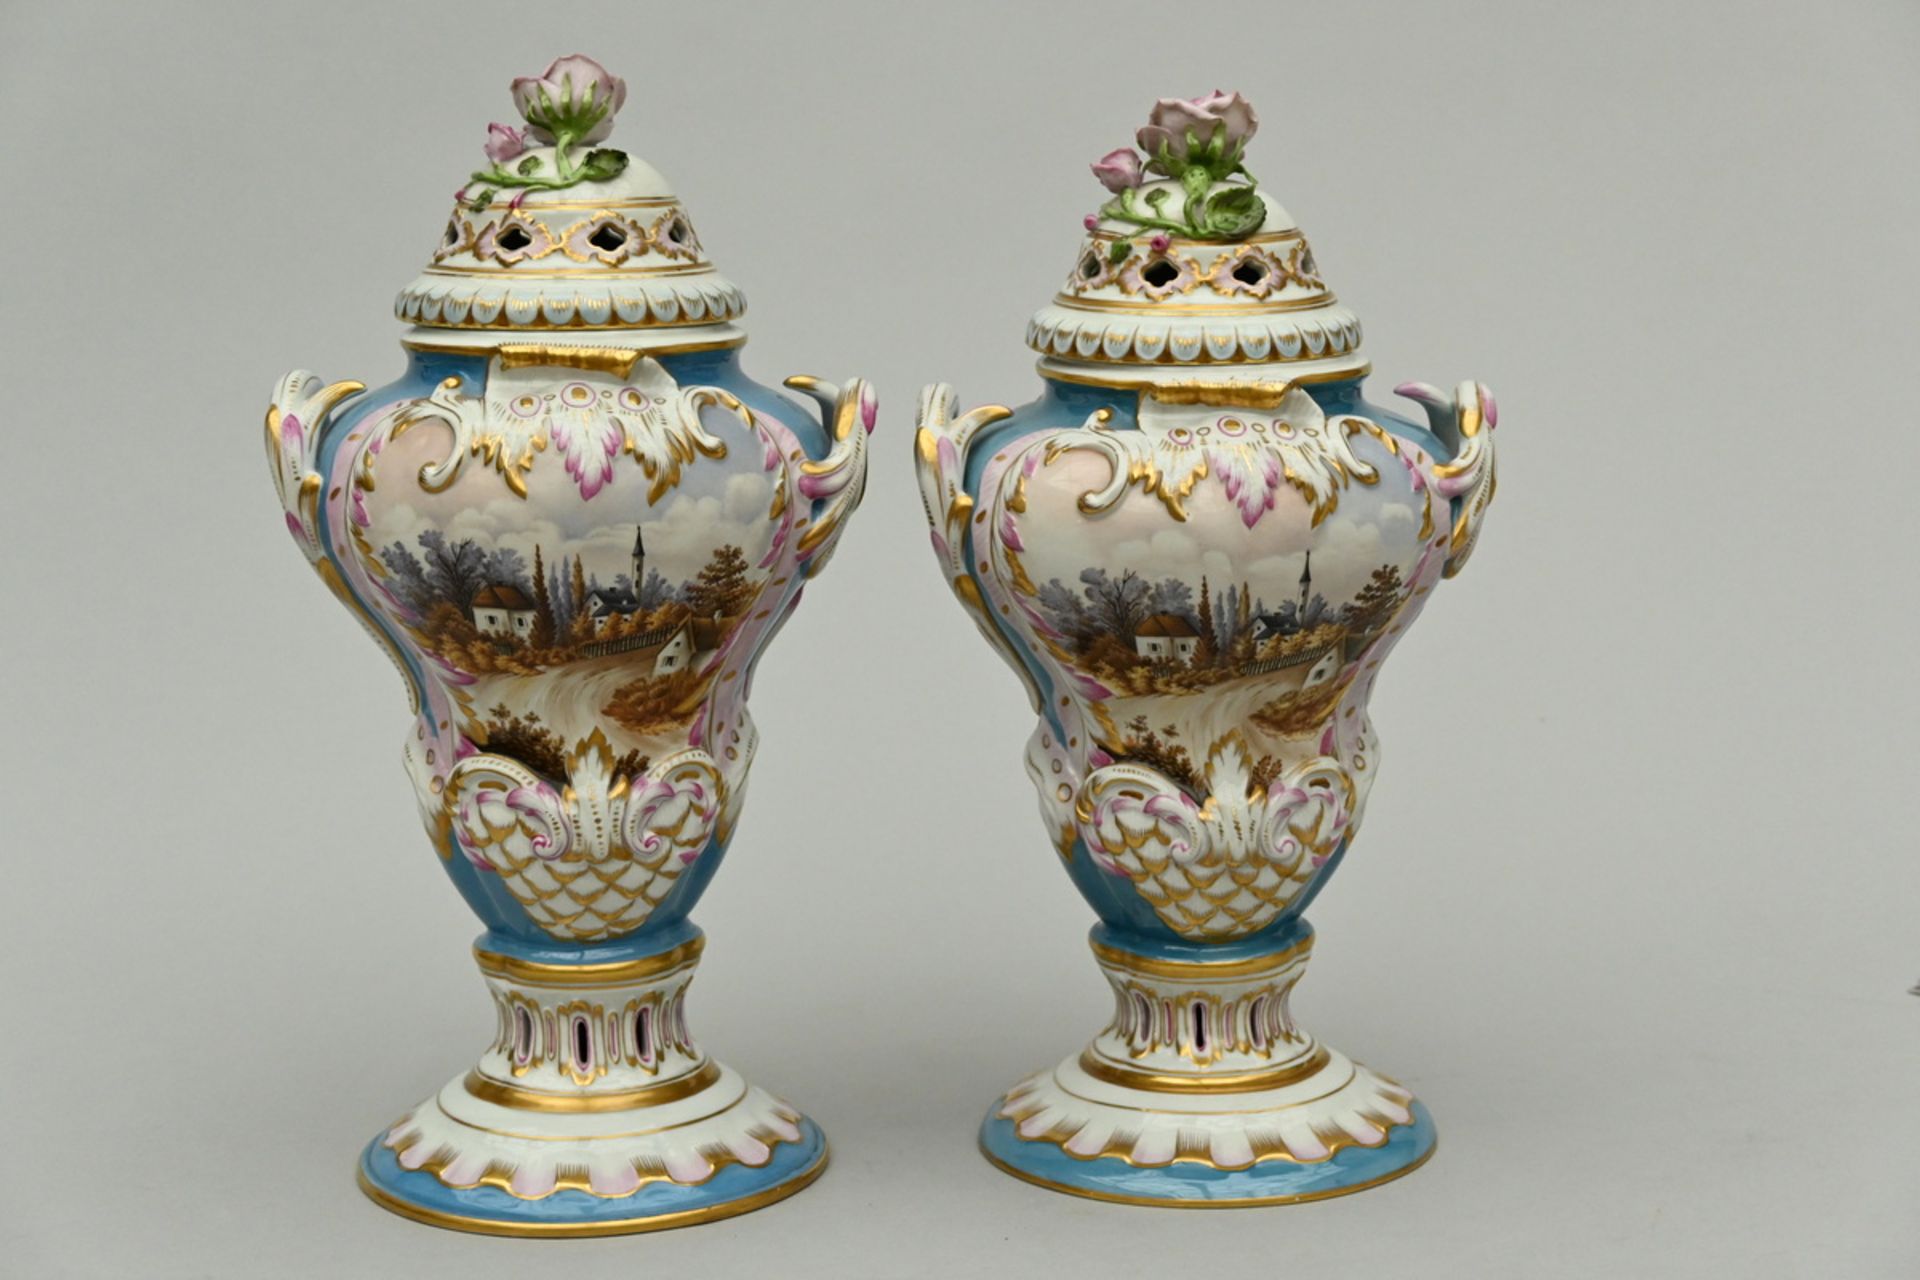 Two Louis XV style vases in Herend porcelain, Hungary (h36-38cm) - Image 3 of 5